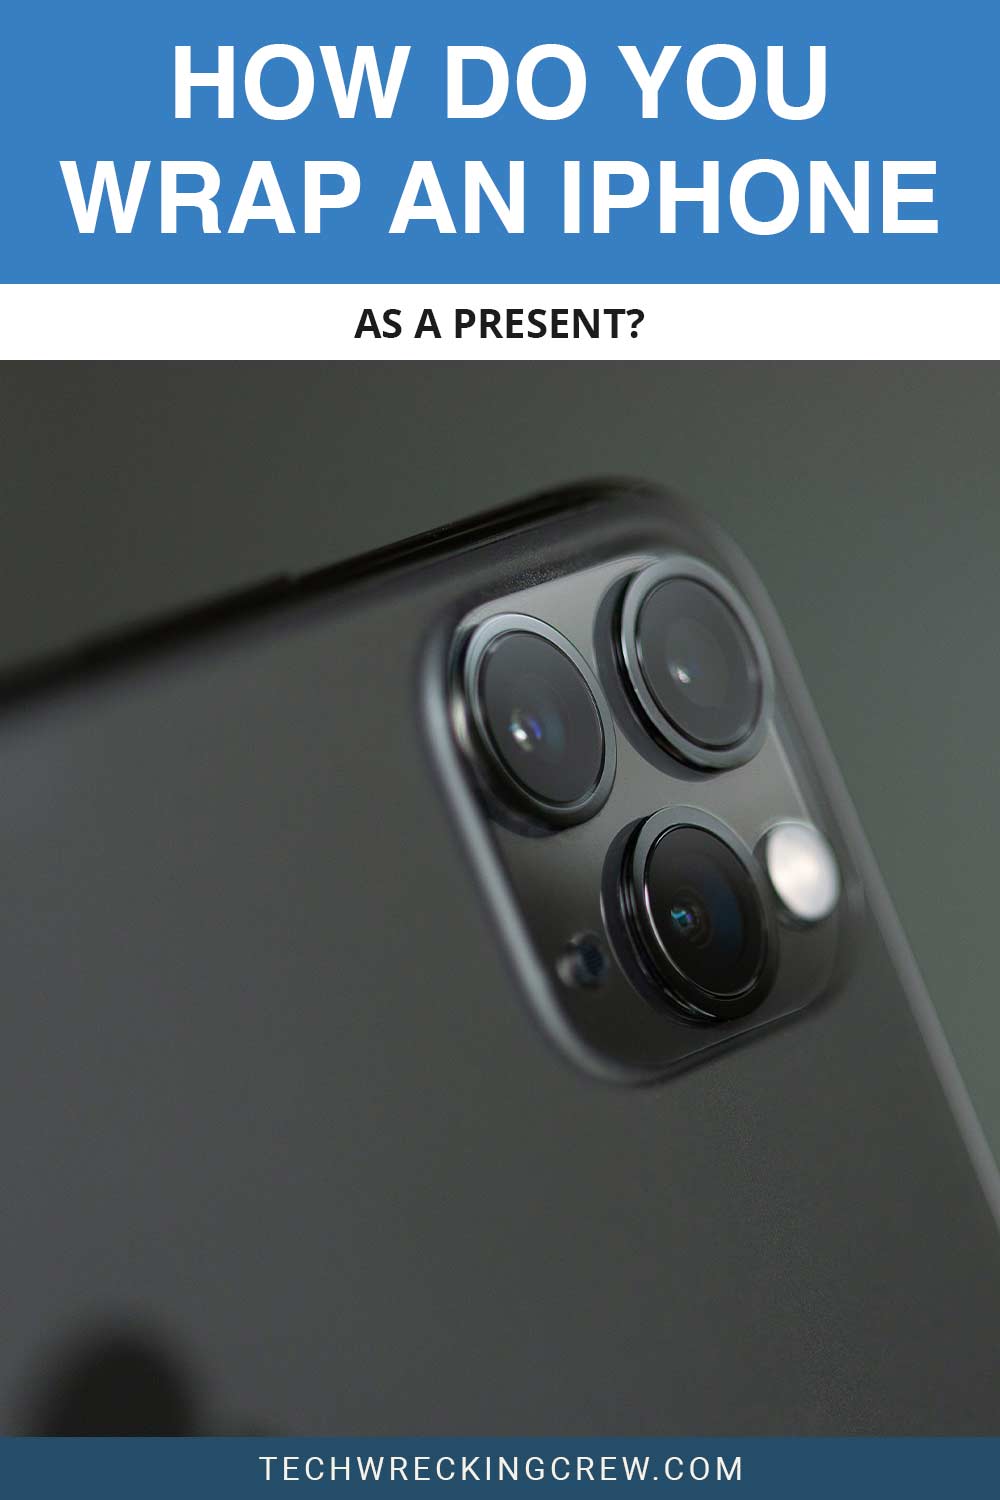 iPhone's cameras - How Do You Wrap An Iphone As A Present?